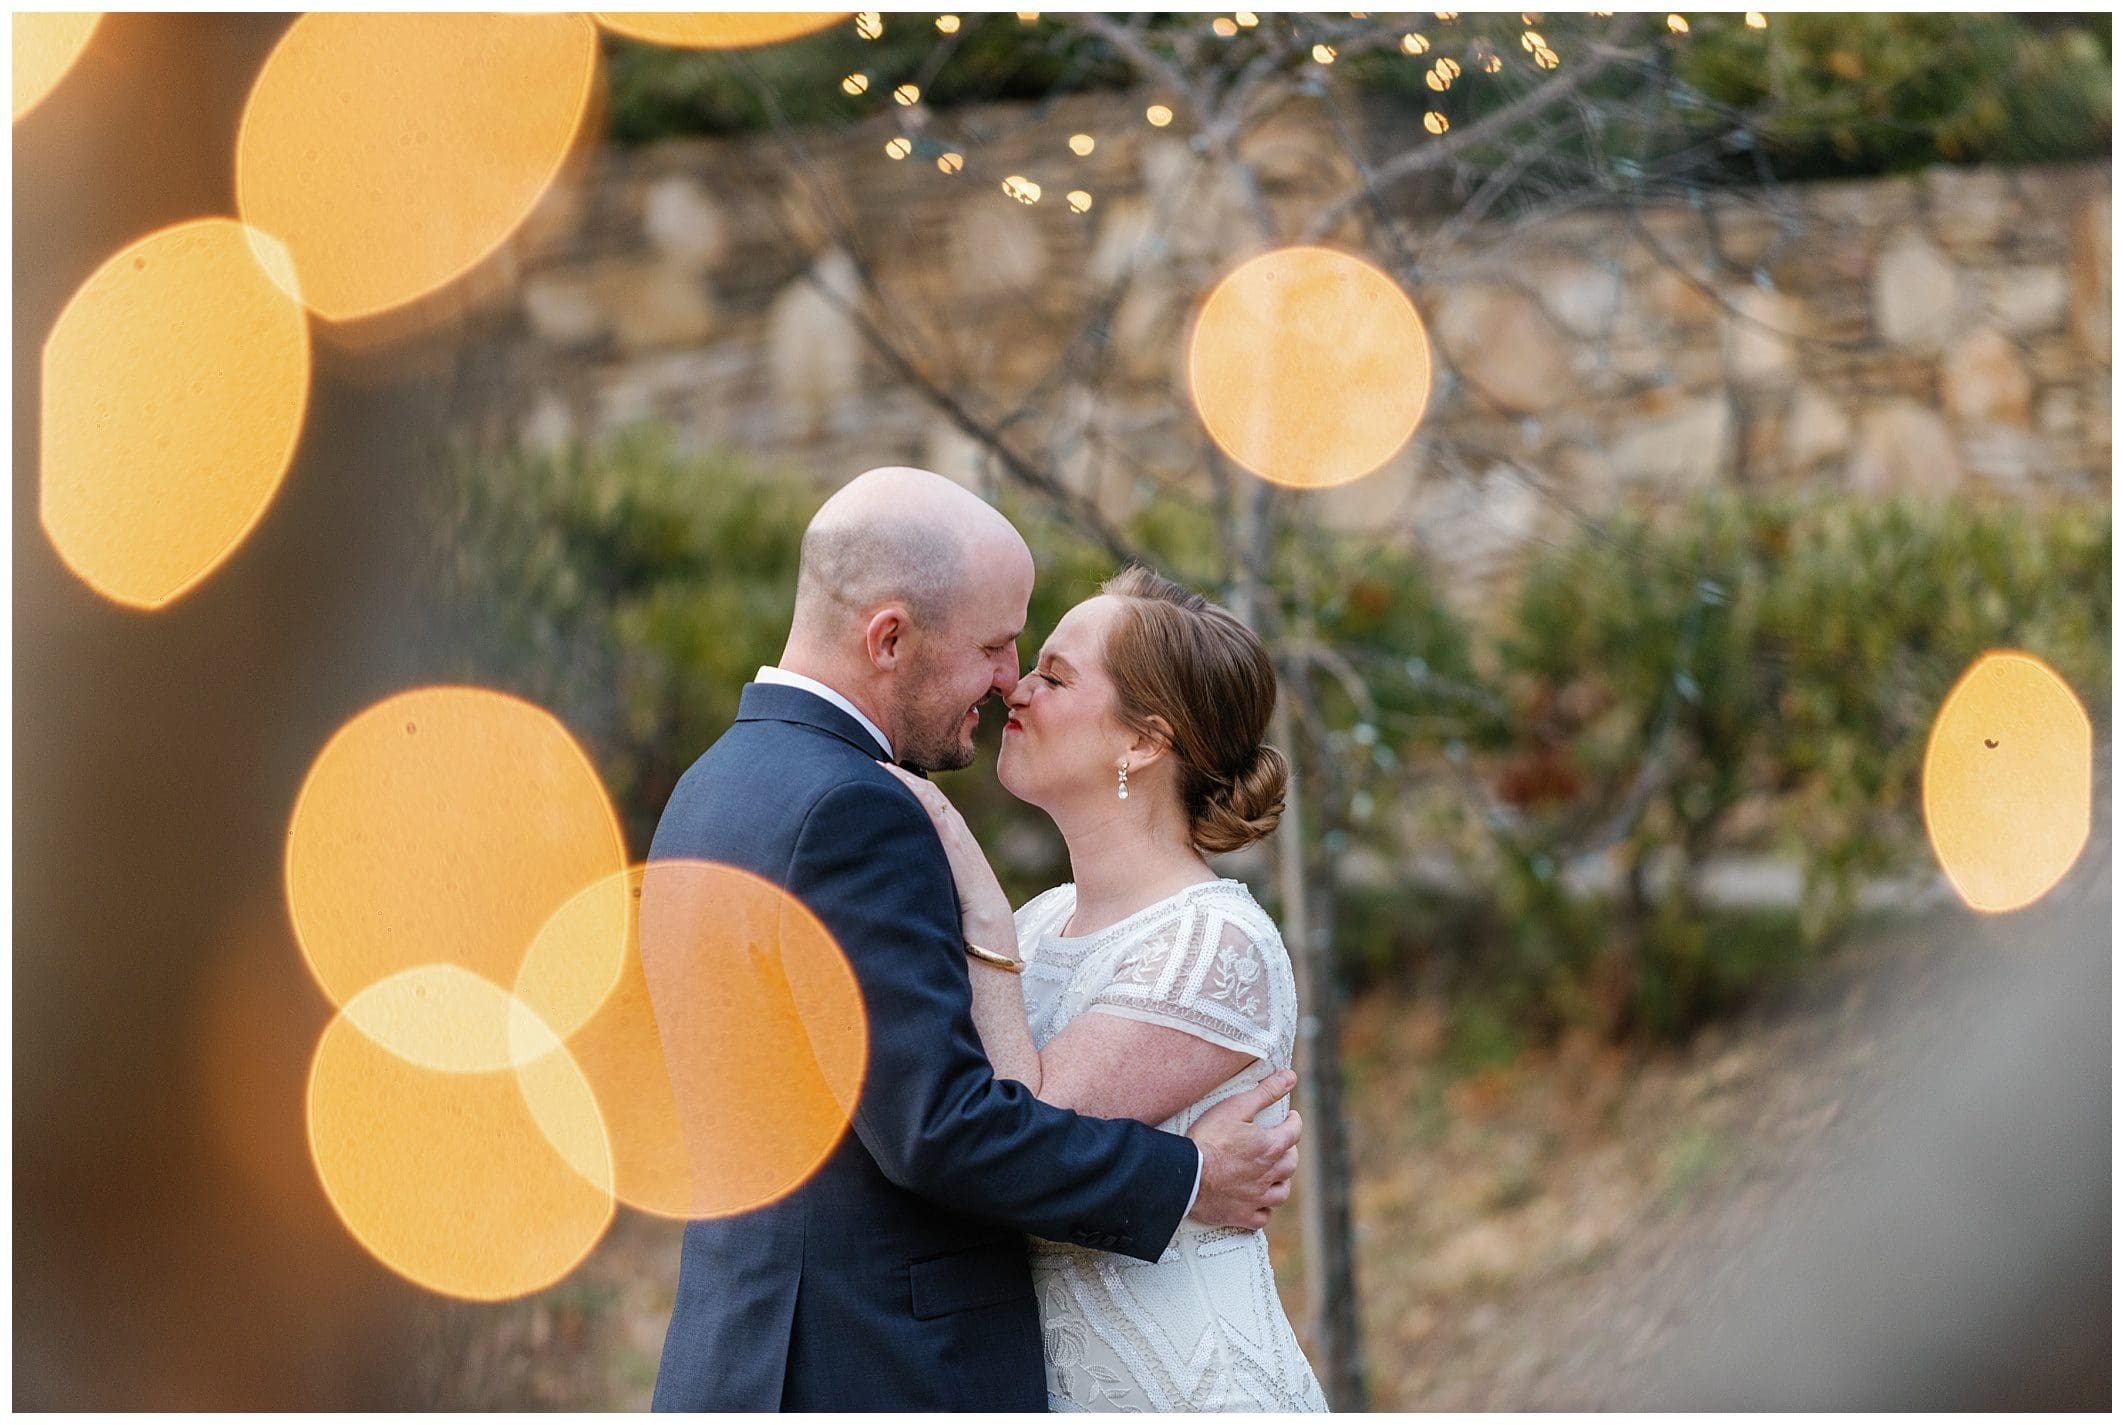 A bride and groom kiss in front of a string of lights.